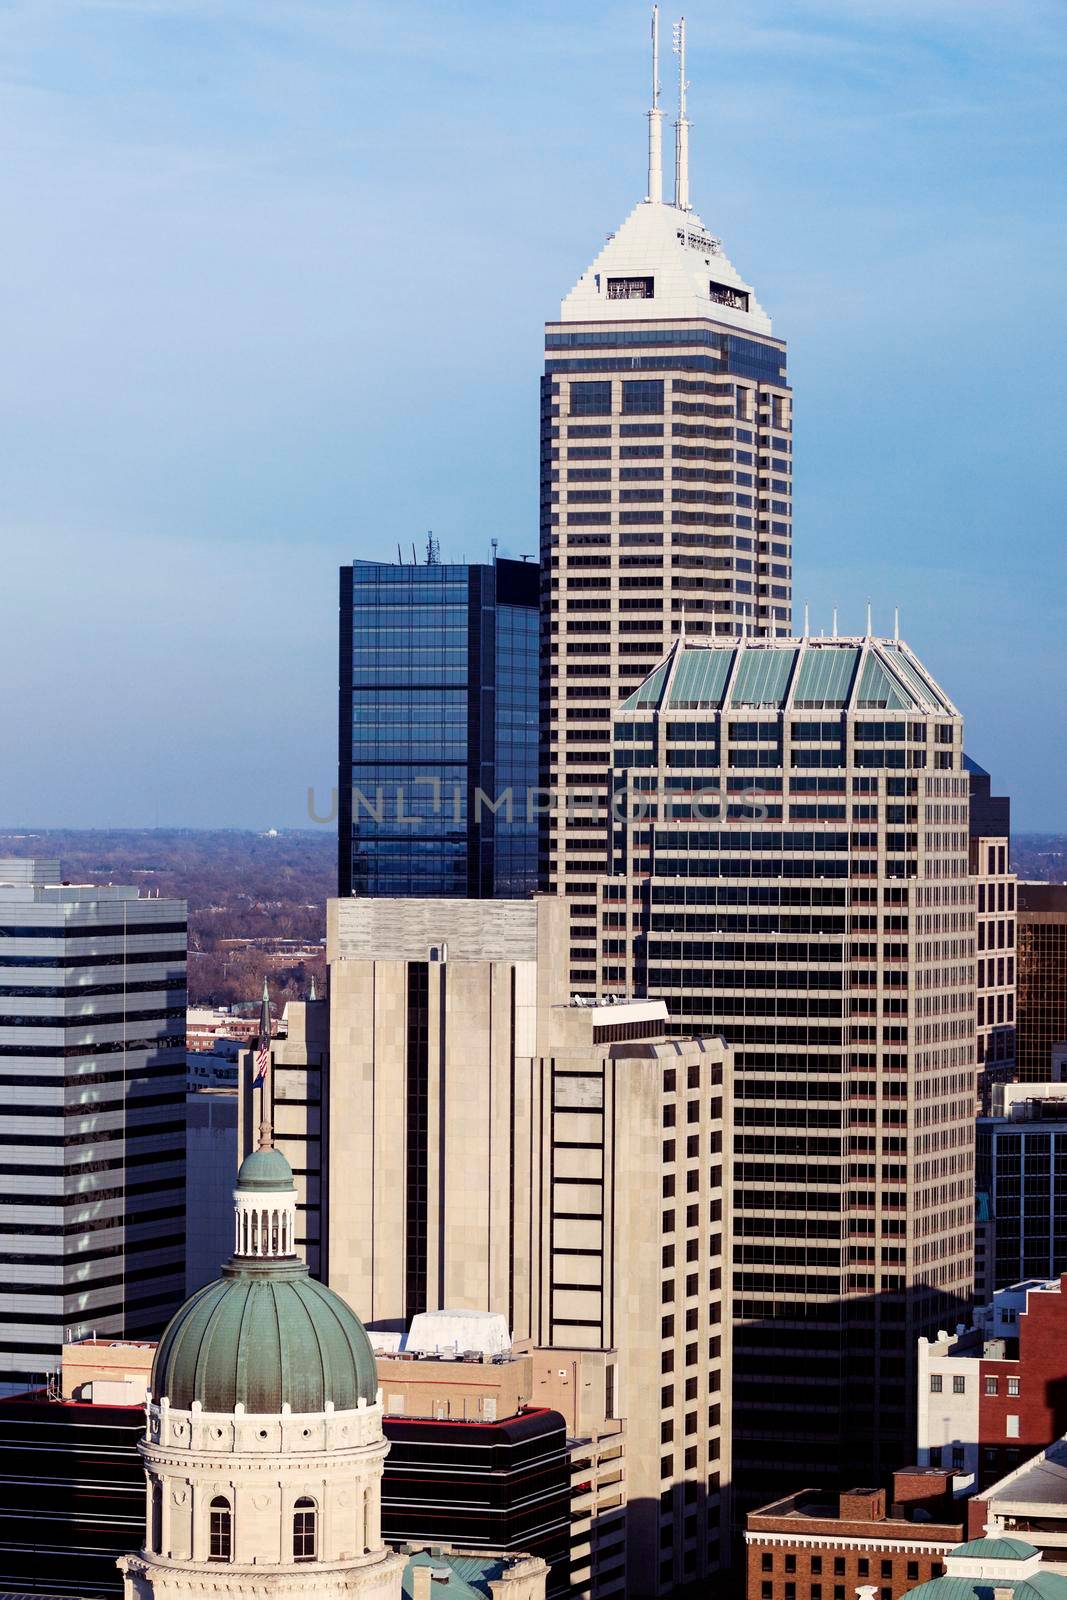 Skyline of the city with State Capitol Builidng. Indianapolis, Indiana, USA.